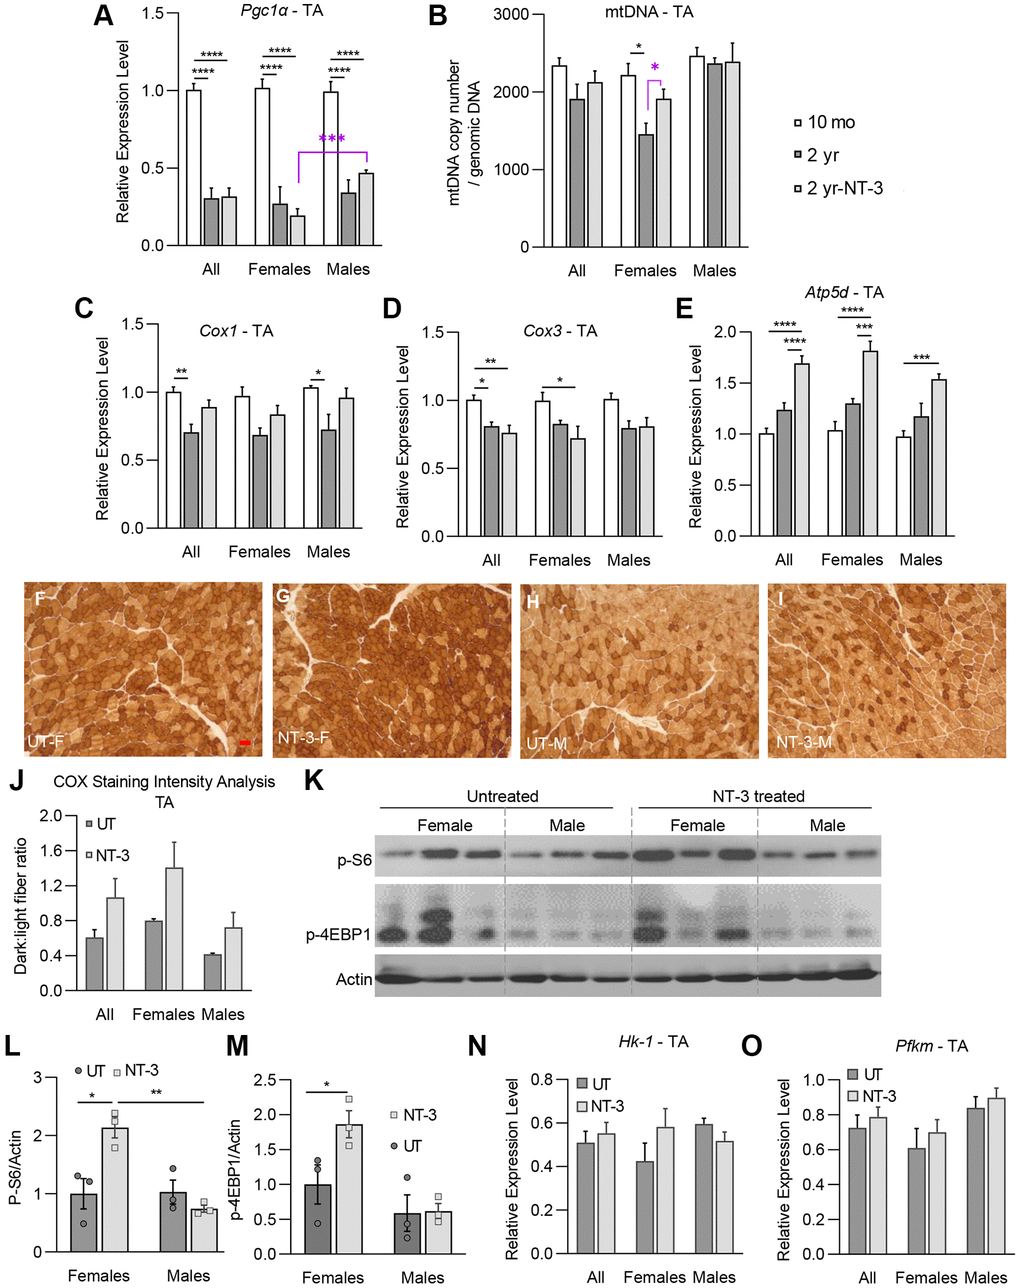 NT-3-treatment-induced changes on markers of mitochondrial biogenesis, oxidative phosphorylation and mTORC1 pathway in tibialis anterior muscle. Bar graphs represent (A) relative expression levels of Pgc1α, (B) mtDNA copy number/genomic DNA, relative expression levels of (C) Cox1, (D) Cox3, and (E) Atp5d genes of tibialis anterior muscle in treated and untreated C57BL/6 mice (n = 8, 10-month-old (mo) mice; n = 8, 2-year-old untreated mice (2 yr); n = 9, 2-year-old NT-3 treated (2 yr-NT-3) mice; with equal sex distribution). (F–I) Representative images of COX-stained sections of tibialis anterior muscle in the treated and untreated female and male mice. Scale bar: 25 μm, applies to all images (J) Bar graphs showing the intensity analysis on COX-stained sections (n = 6, untreated mice; n = 6, NT-3 treated mice; with equal sex distribution). (K) Western blots showing the expression level of p-S6, and p-4E-BP1 proteins. Protein levels of (L) p-S6, and (M) p-4E-BP1 normalized to Actin (n = 6 for both cohorts with equal sex distribution, blots were cropped for conciseness). Relative expression levels of (N) Hk-1 and (O) Pfkm enzymes (n = 8, 2-year-old untreated mice; n = 9, 2-year-old NT-3 treated mice). Student t-test for the analysis marked with purple asterisk. Two-way ANOVA, Tukey’s multiple comparisons test. Data is represented as mean ± SEM; *p **p ***p ****p 